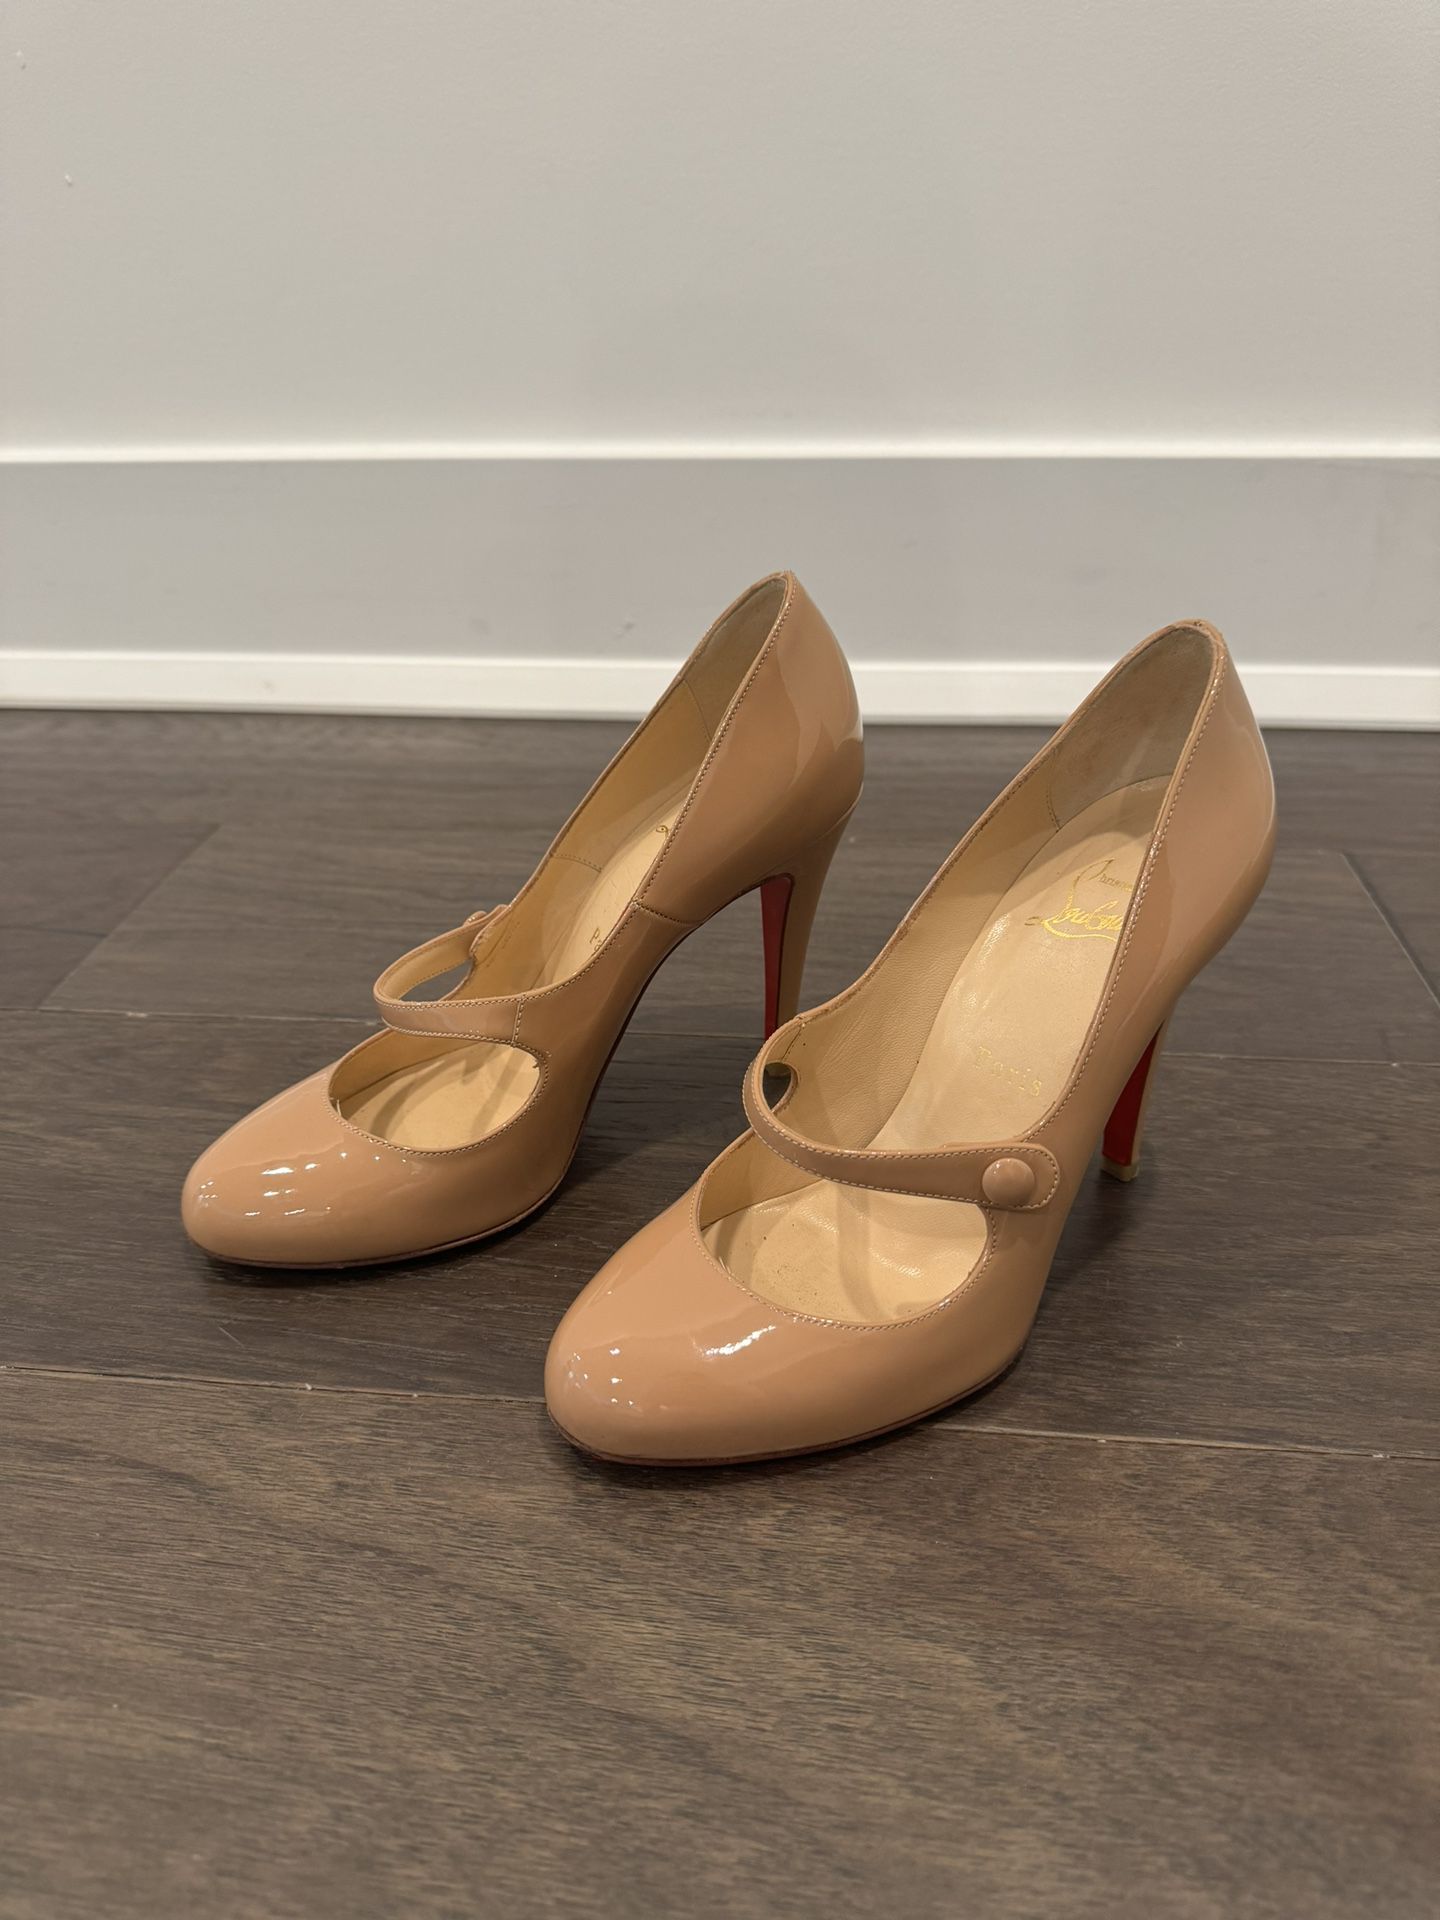 Christian Louboutin Charleen 100 Patent pumps nude size 38